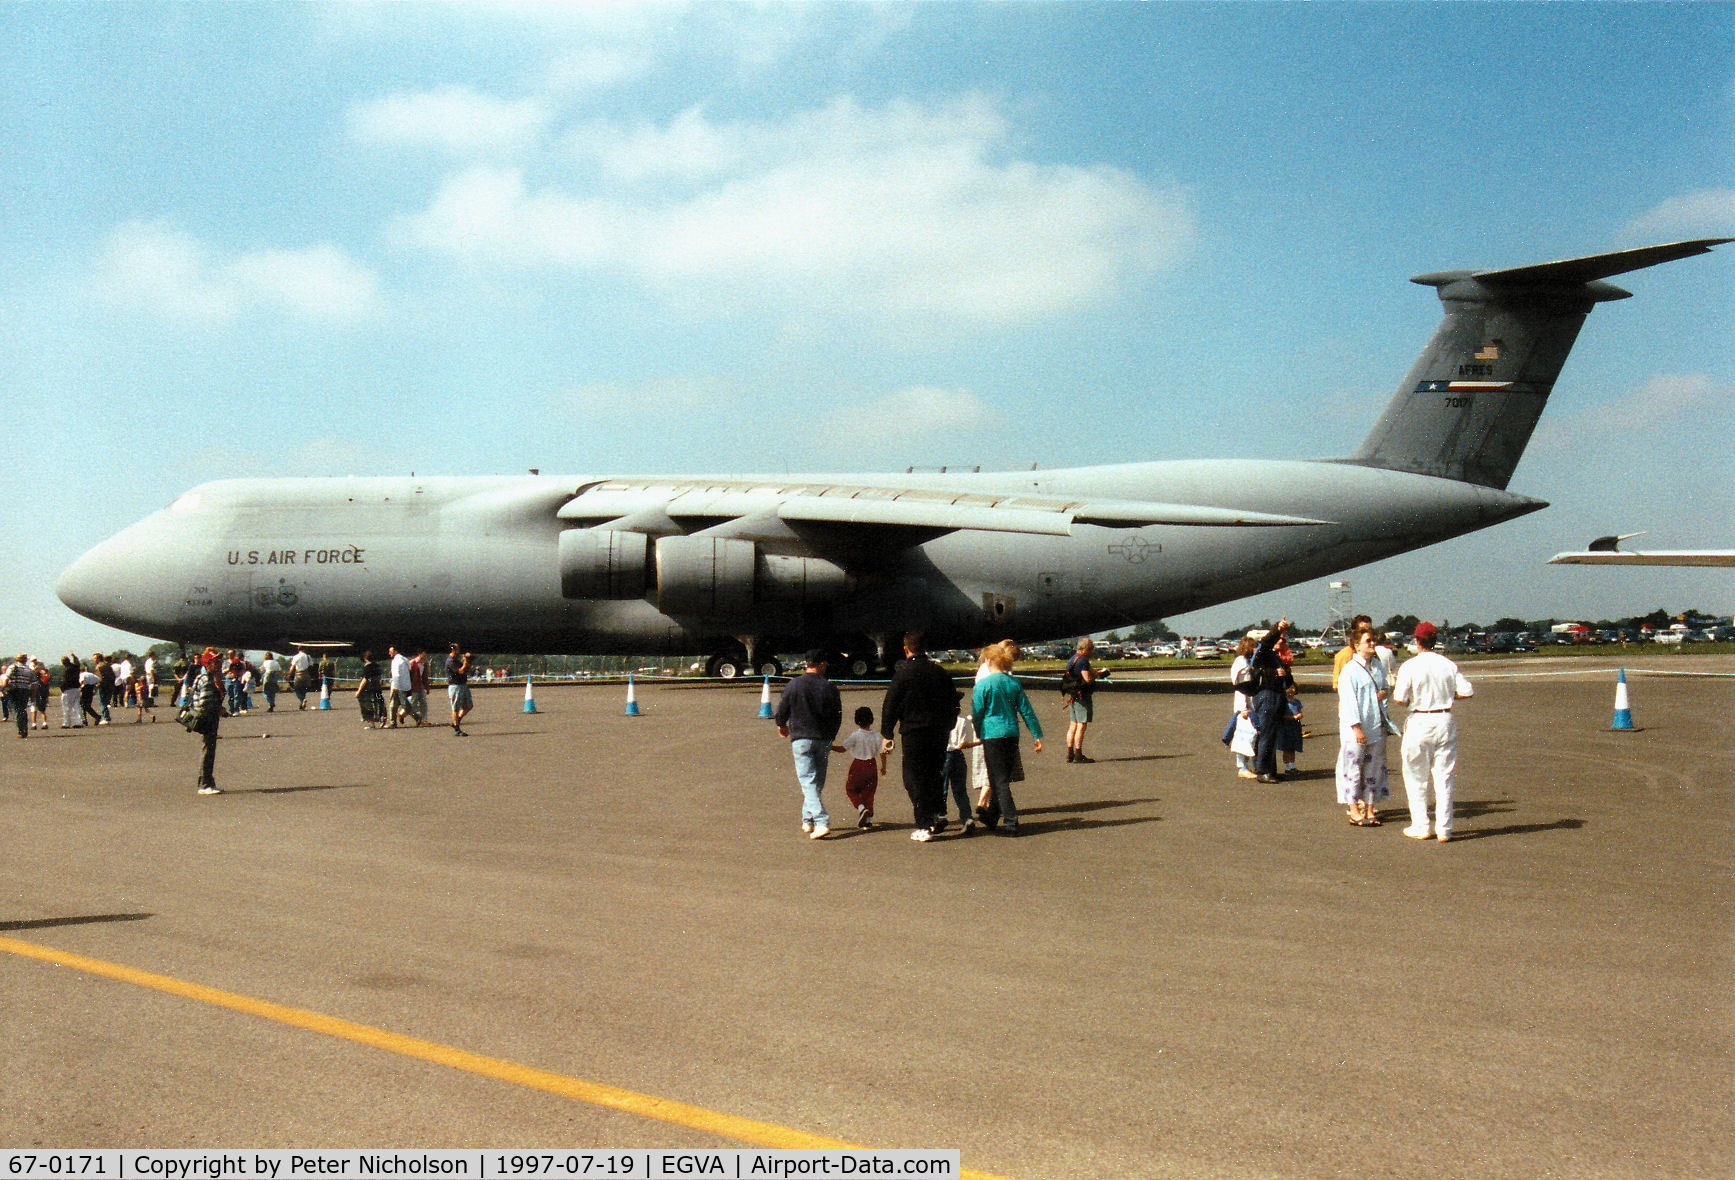 67-0171, 1967 Lockheed C-5A Galaxy C/N 500-0010, Another view of Reach 7171 Galaxy C-5A of McGuire AFB's 433rd Airlift Wing on display at the 1997 Intnl Air Tattoo at RAF Fairford.